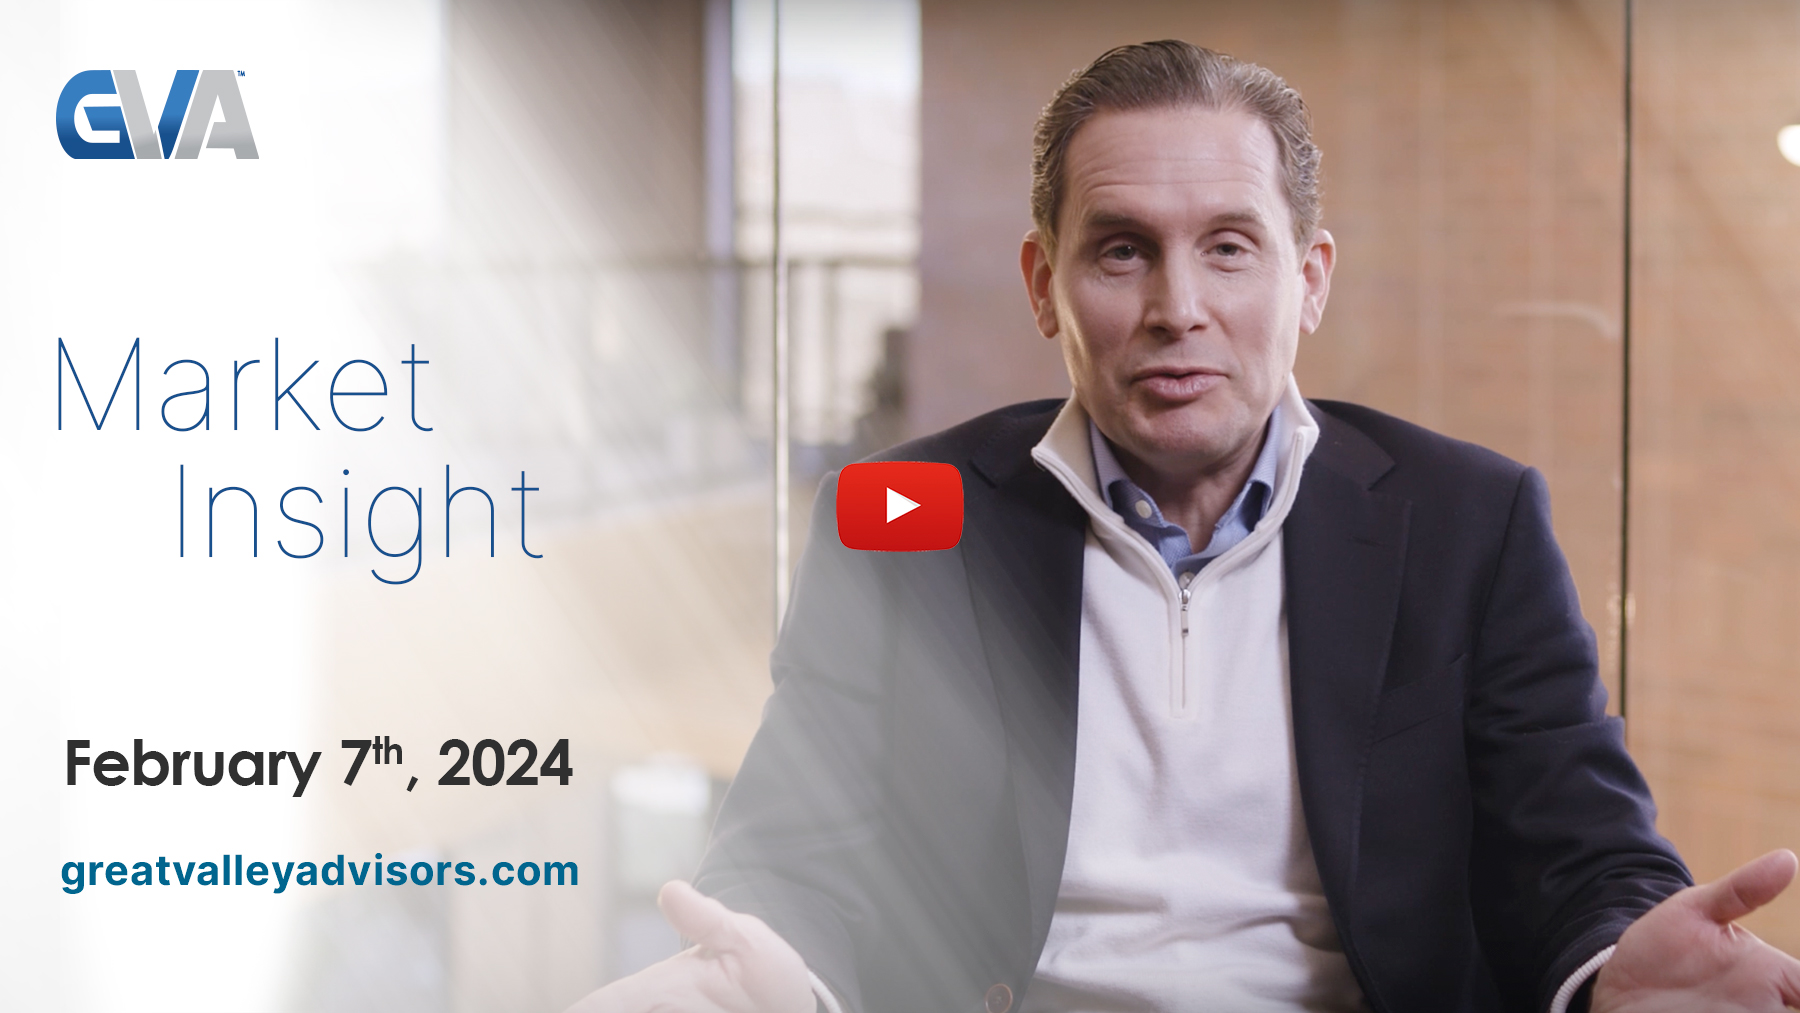 Market Insights with Eric: Episode 18, February 7th, 2024